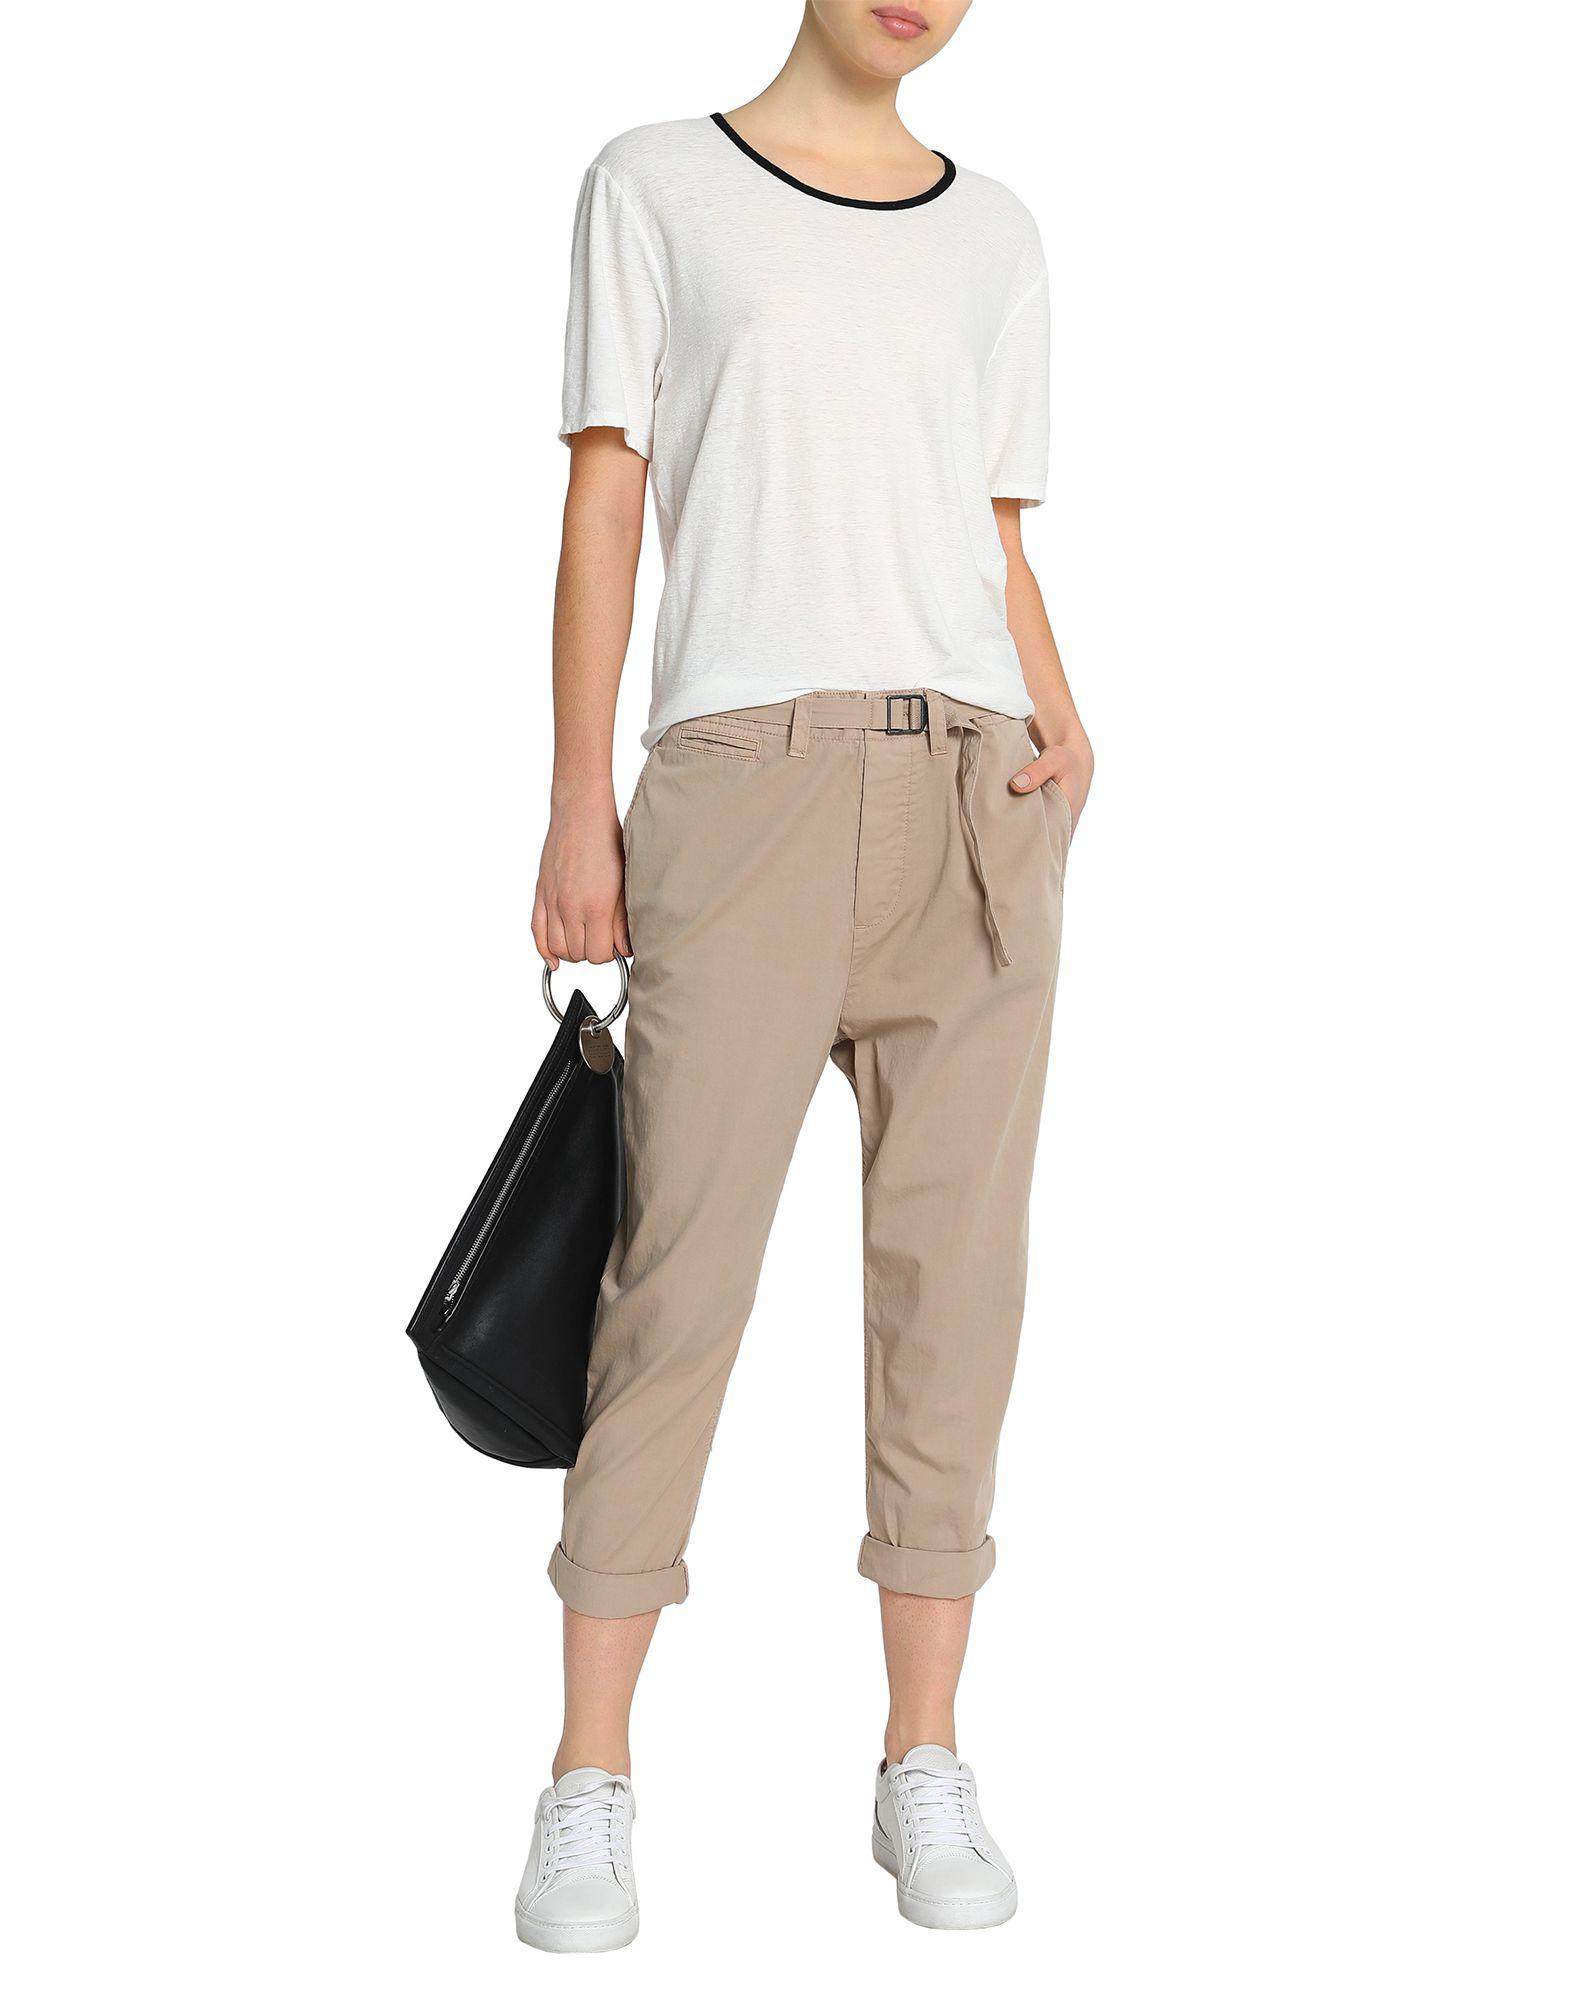 James Perse Cotton 3/4-length Short in Beige (Natural) - Lyst